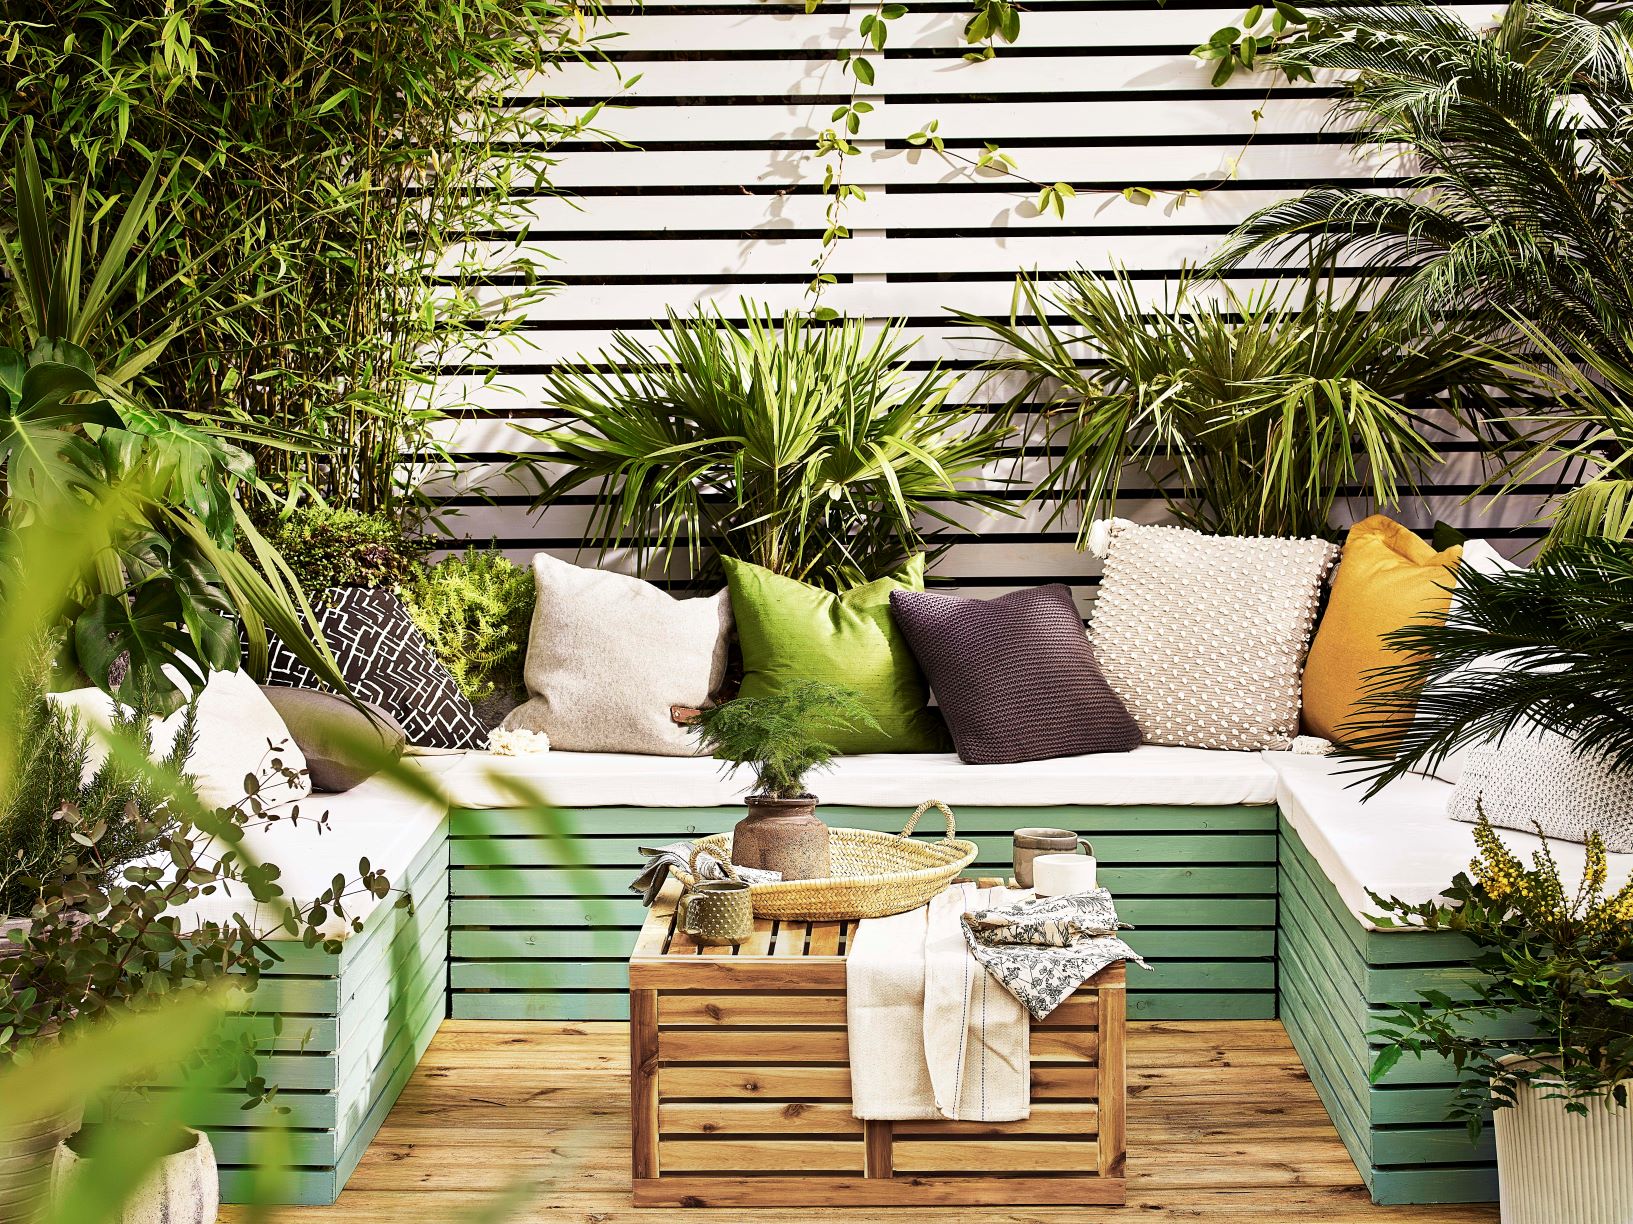 Decorating your garden furniture with paint